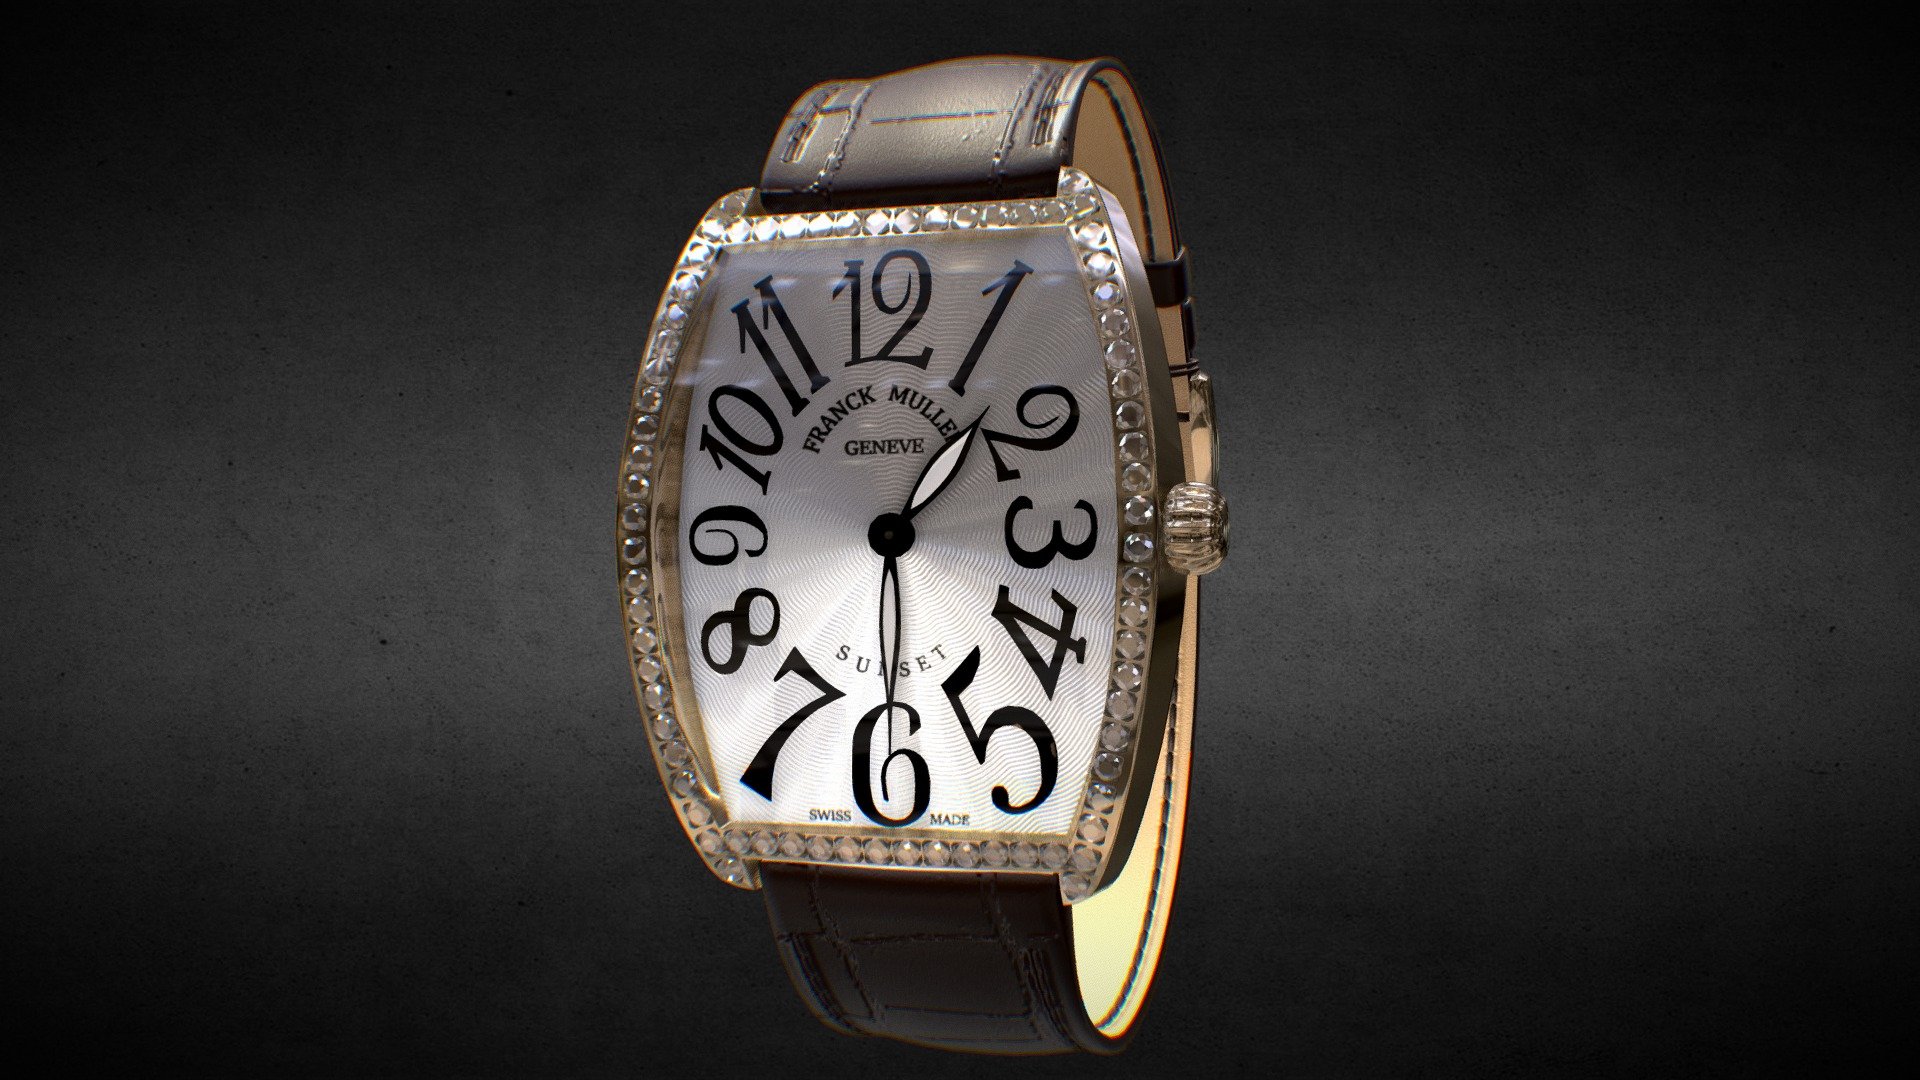 Awesome stainless steel Franck Muller Cintrée Curvex 2852 QZ D 1R watch․
Use for Unreal Engine 4 and Unity3D. Try in augmented reality in the AR-Watches app. 
Links to the app: Android, iOS

Currently available for download in FBX format.

3D model developed by AR-Watches

Disclaimer: We do not own the design of the watch, we only made the 3D model 3d model